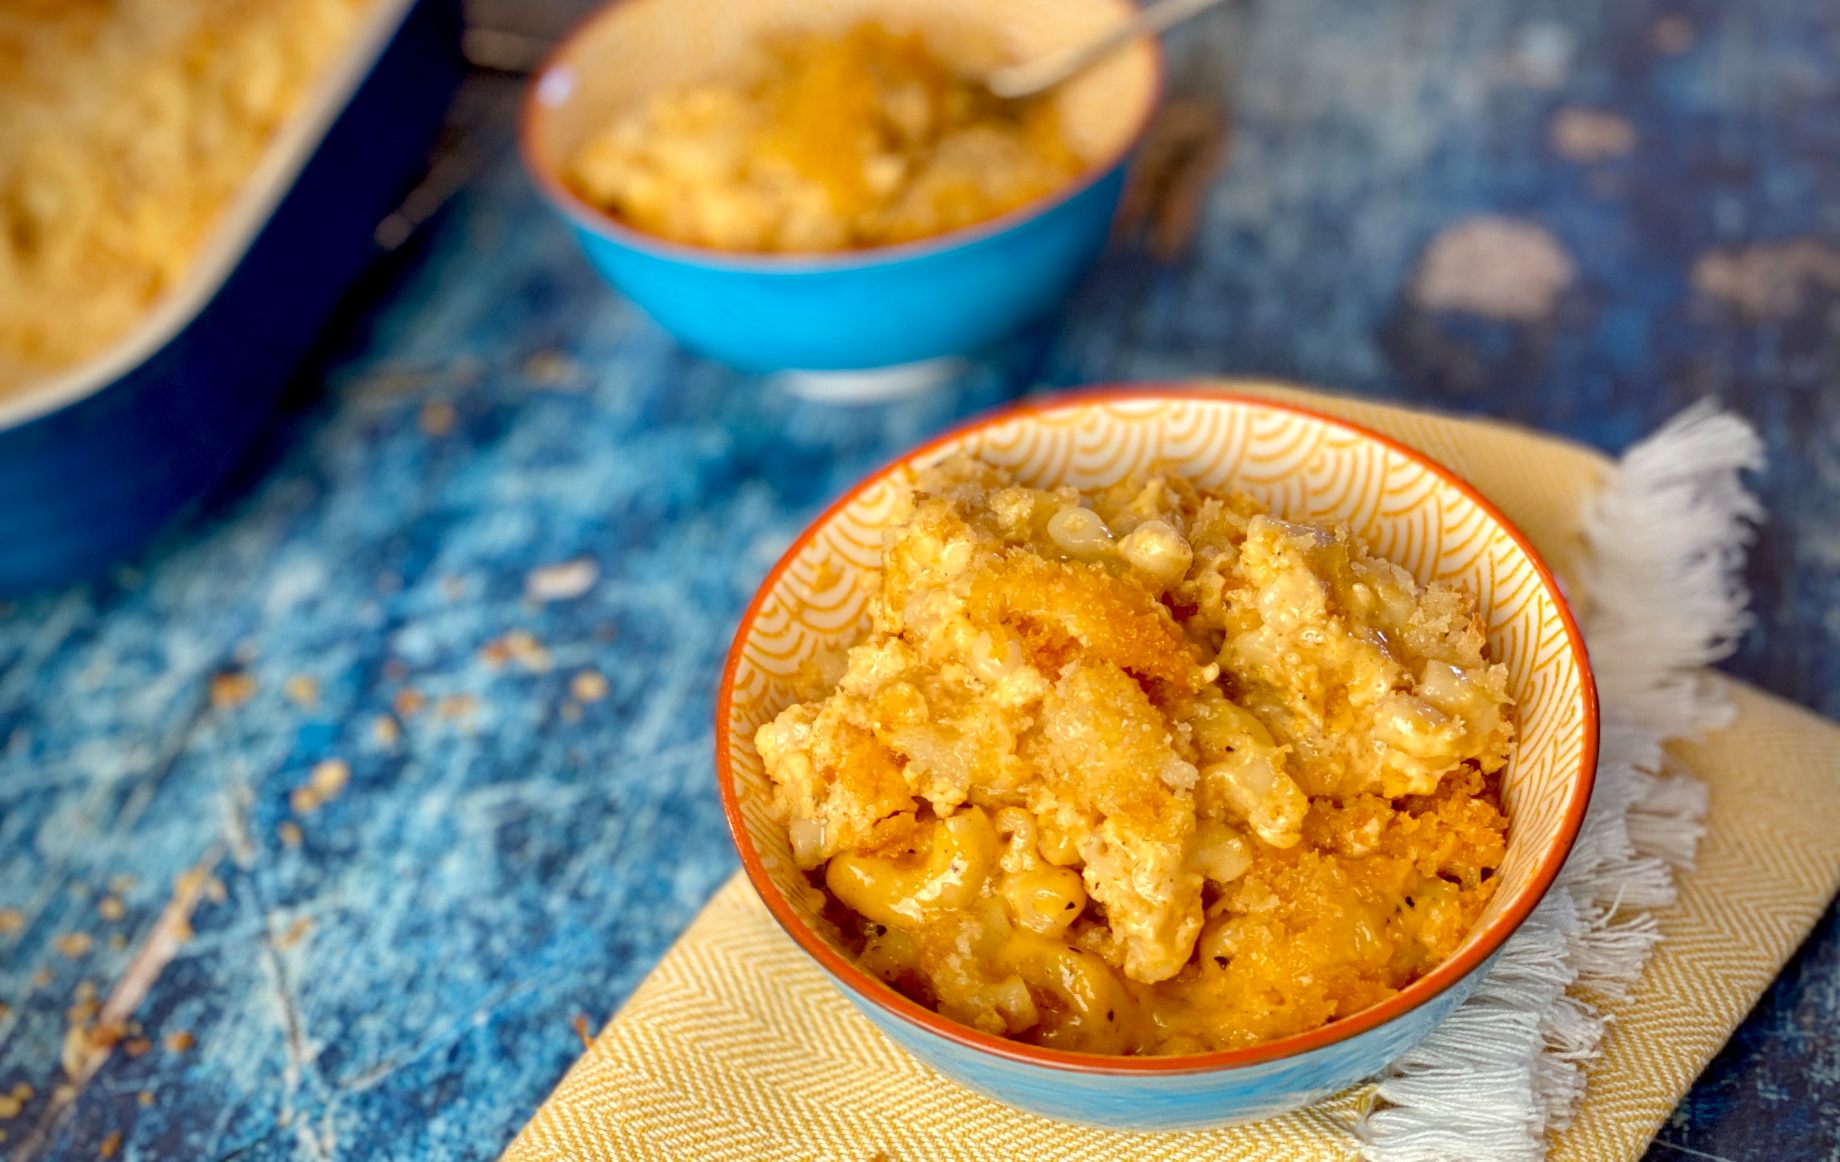 Baked macaroni with bread crumbs in a bowl on a yellow napkin sitting on a bright blue table.